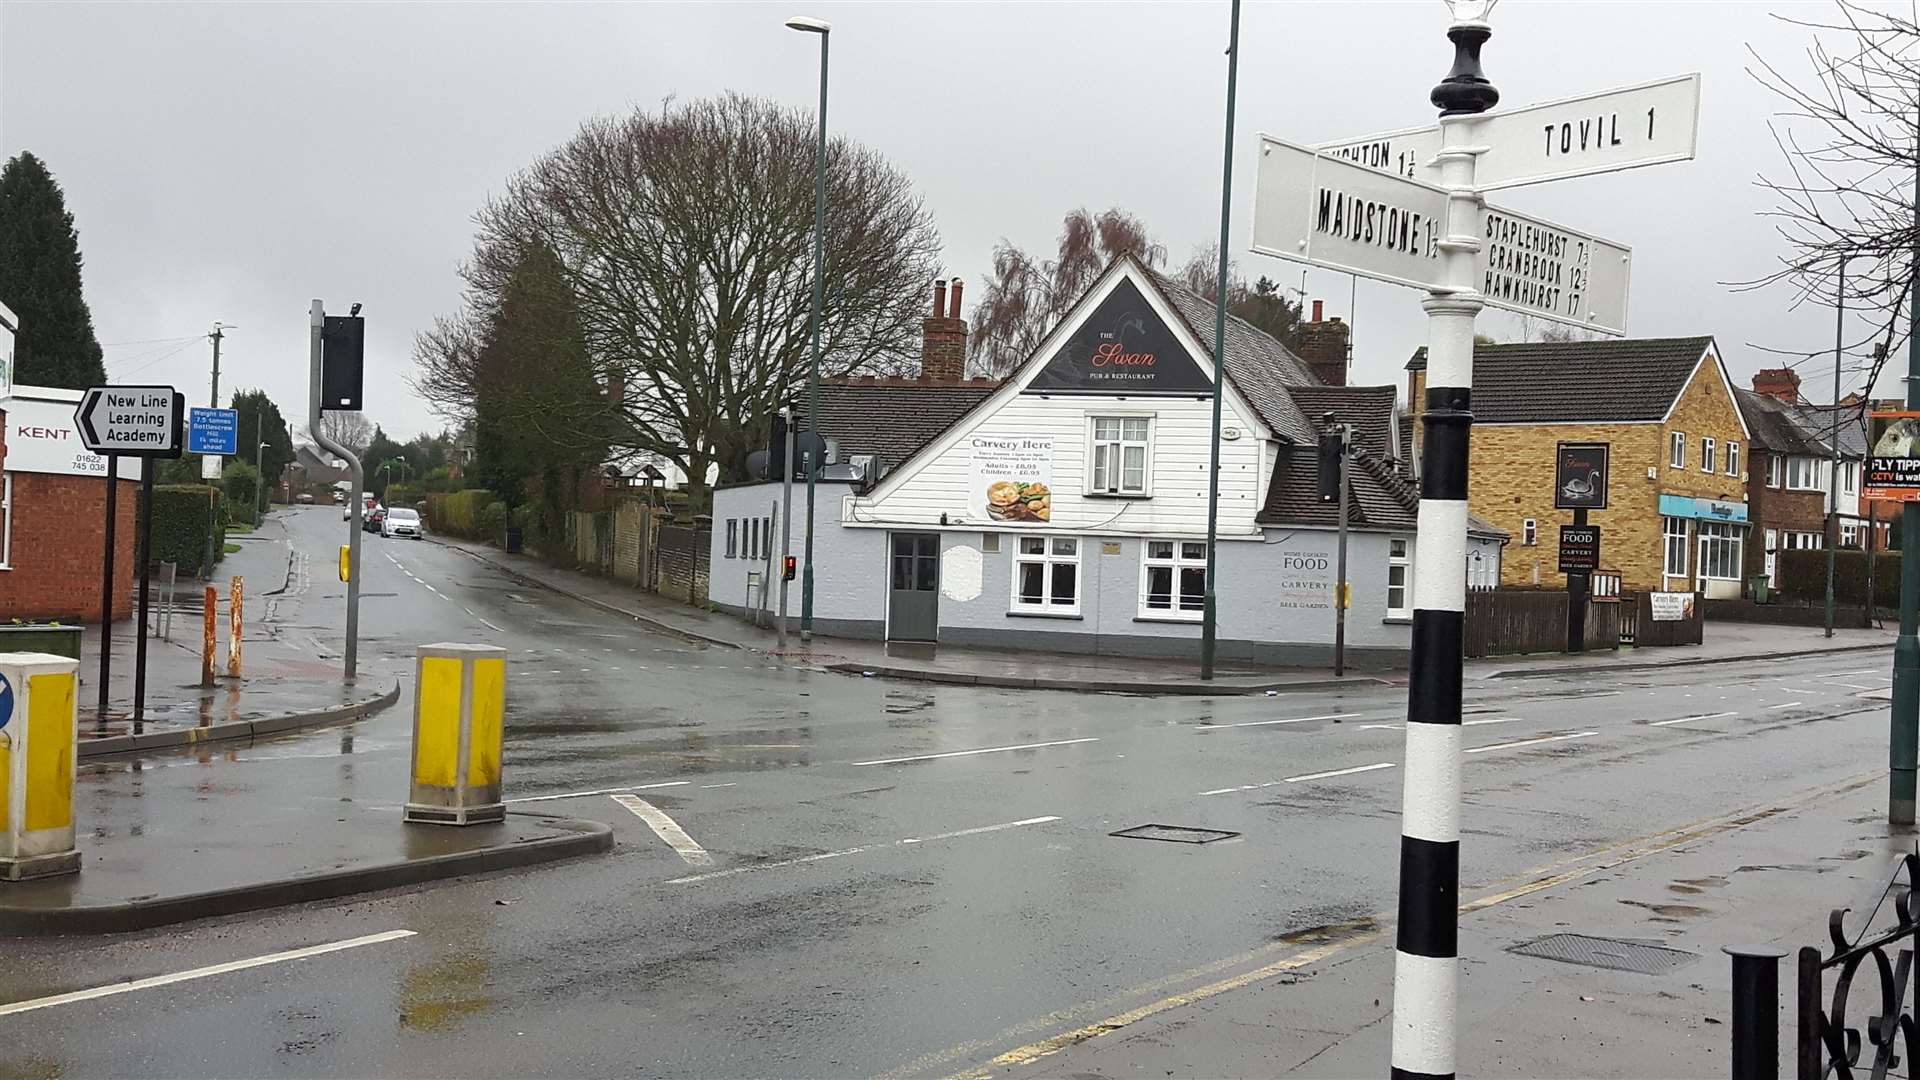 Plans for the Cripple Street, Loose Road, Boughton Lane crossroads are 'paused'